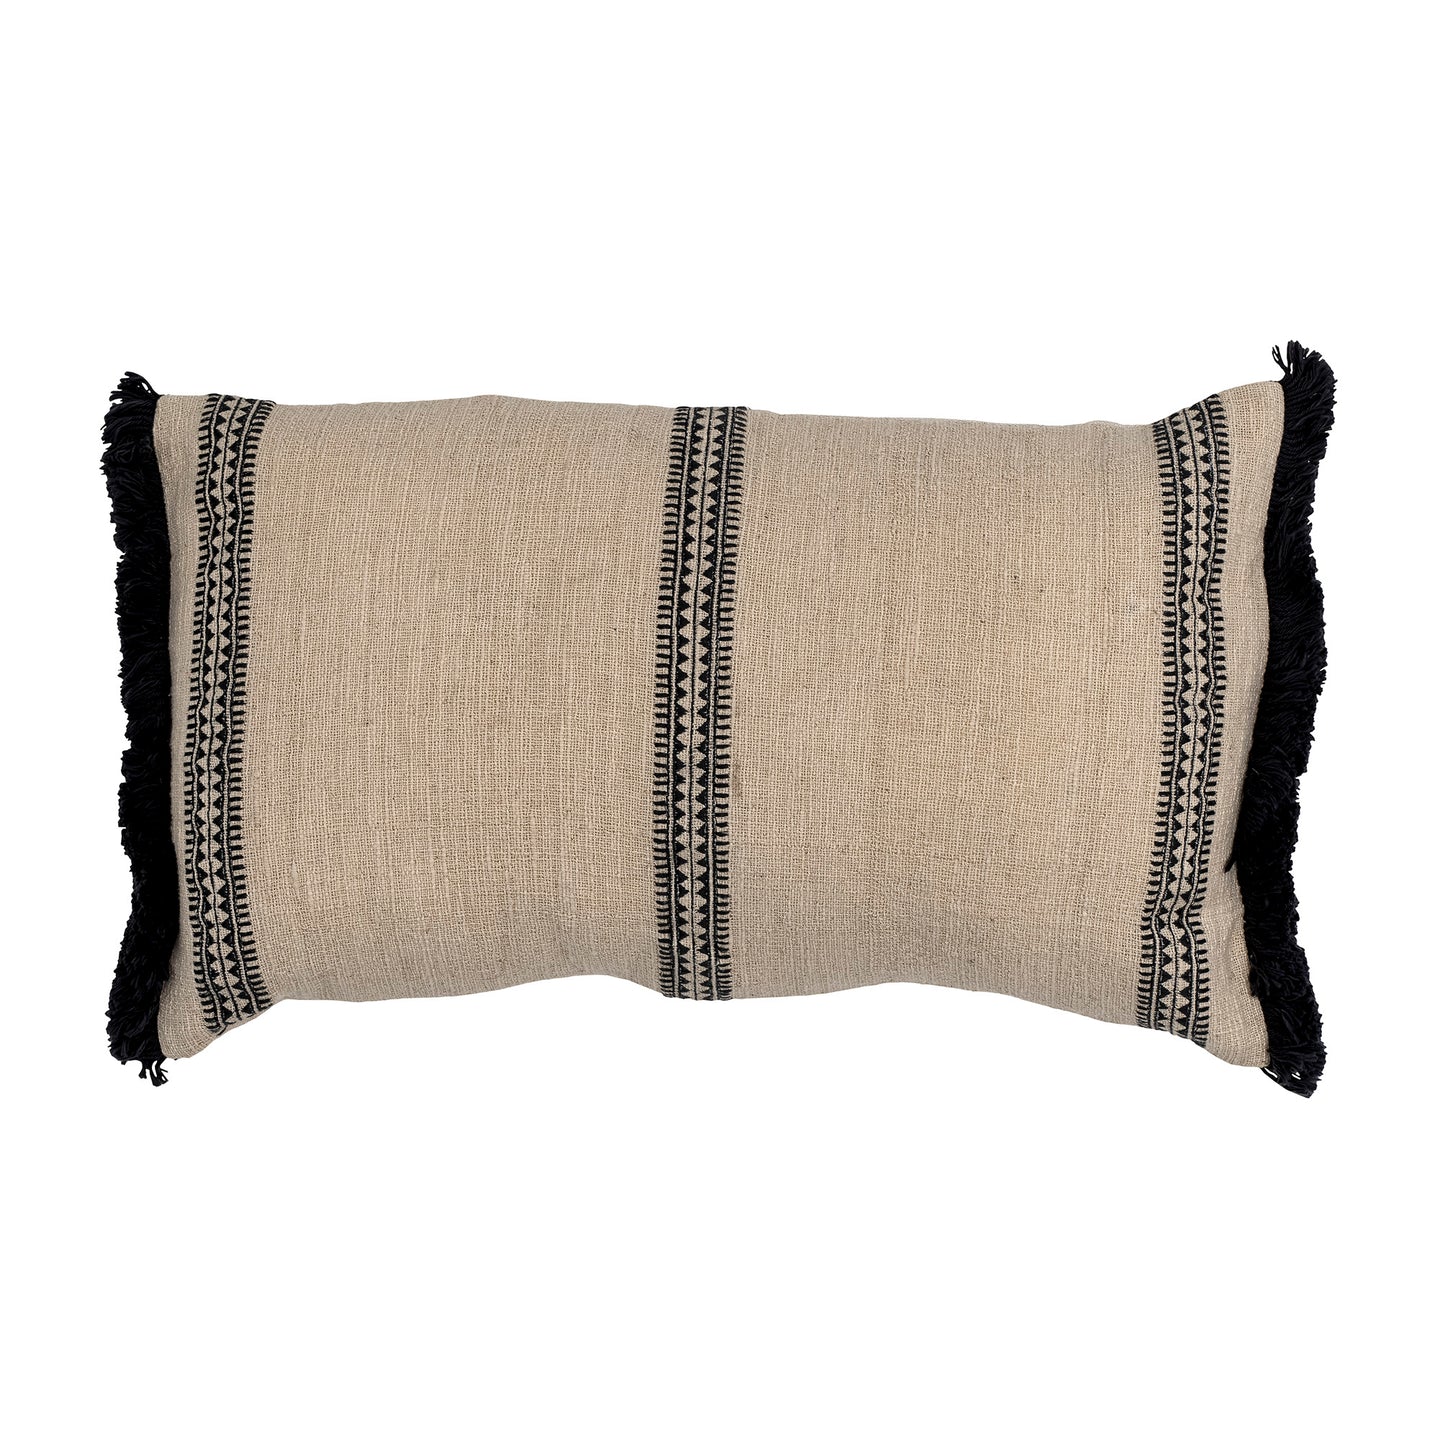 The Adea Cushion by Bloomingville 